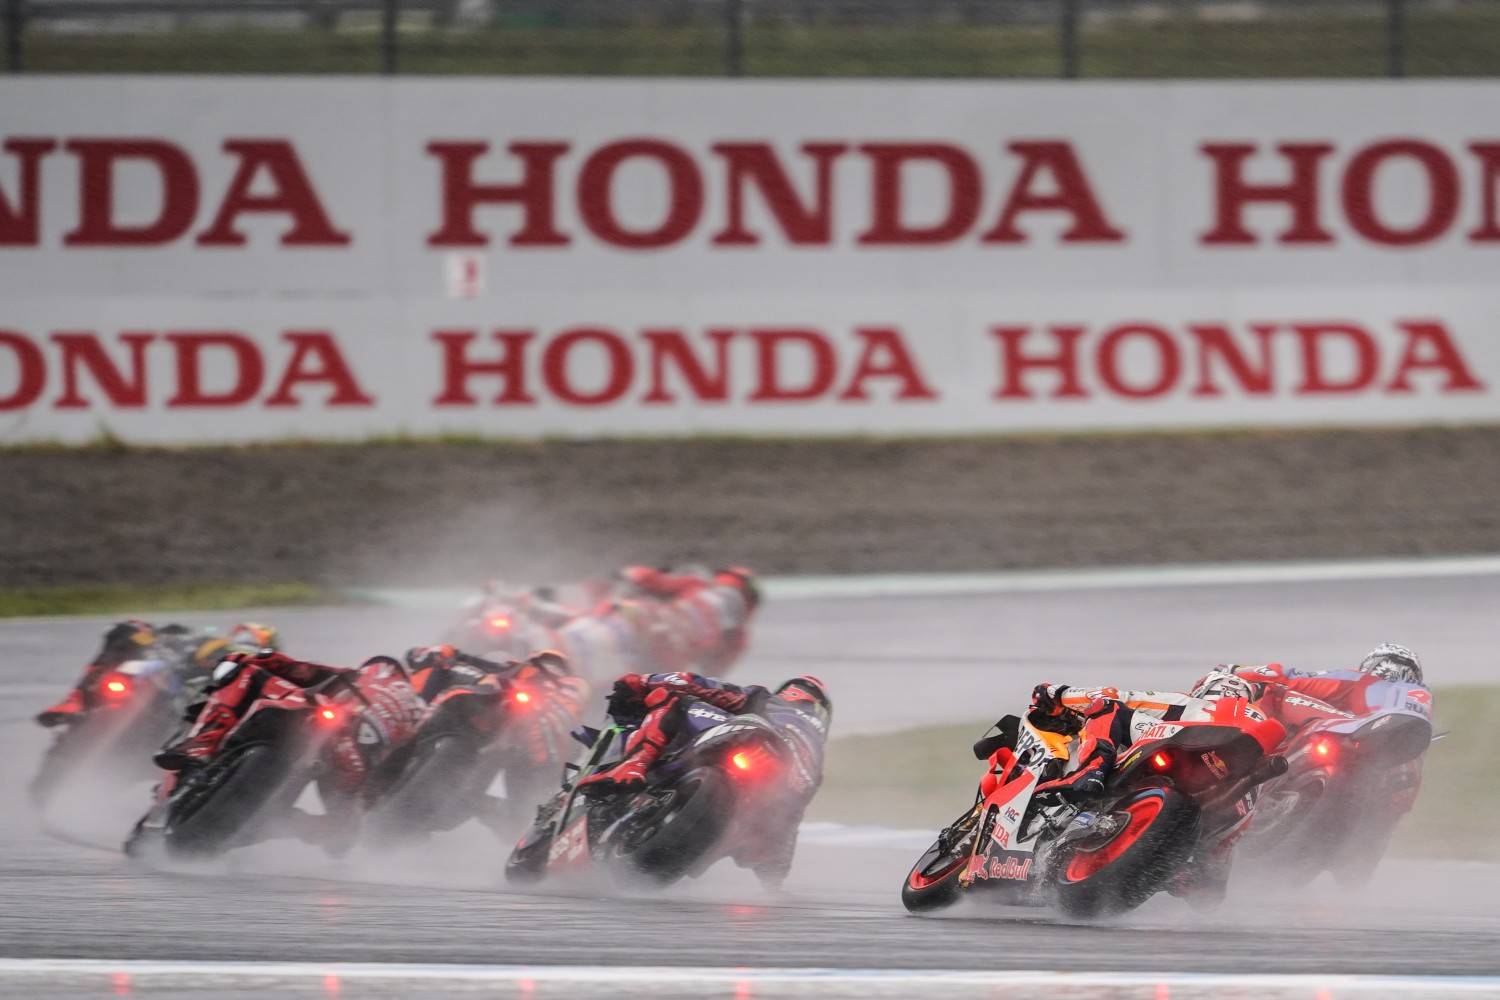 Heavy Rain at Motegi won by Jorge Martin who was leading when the red flag waved.